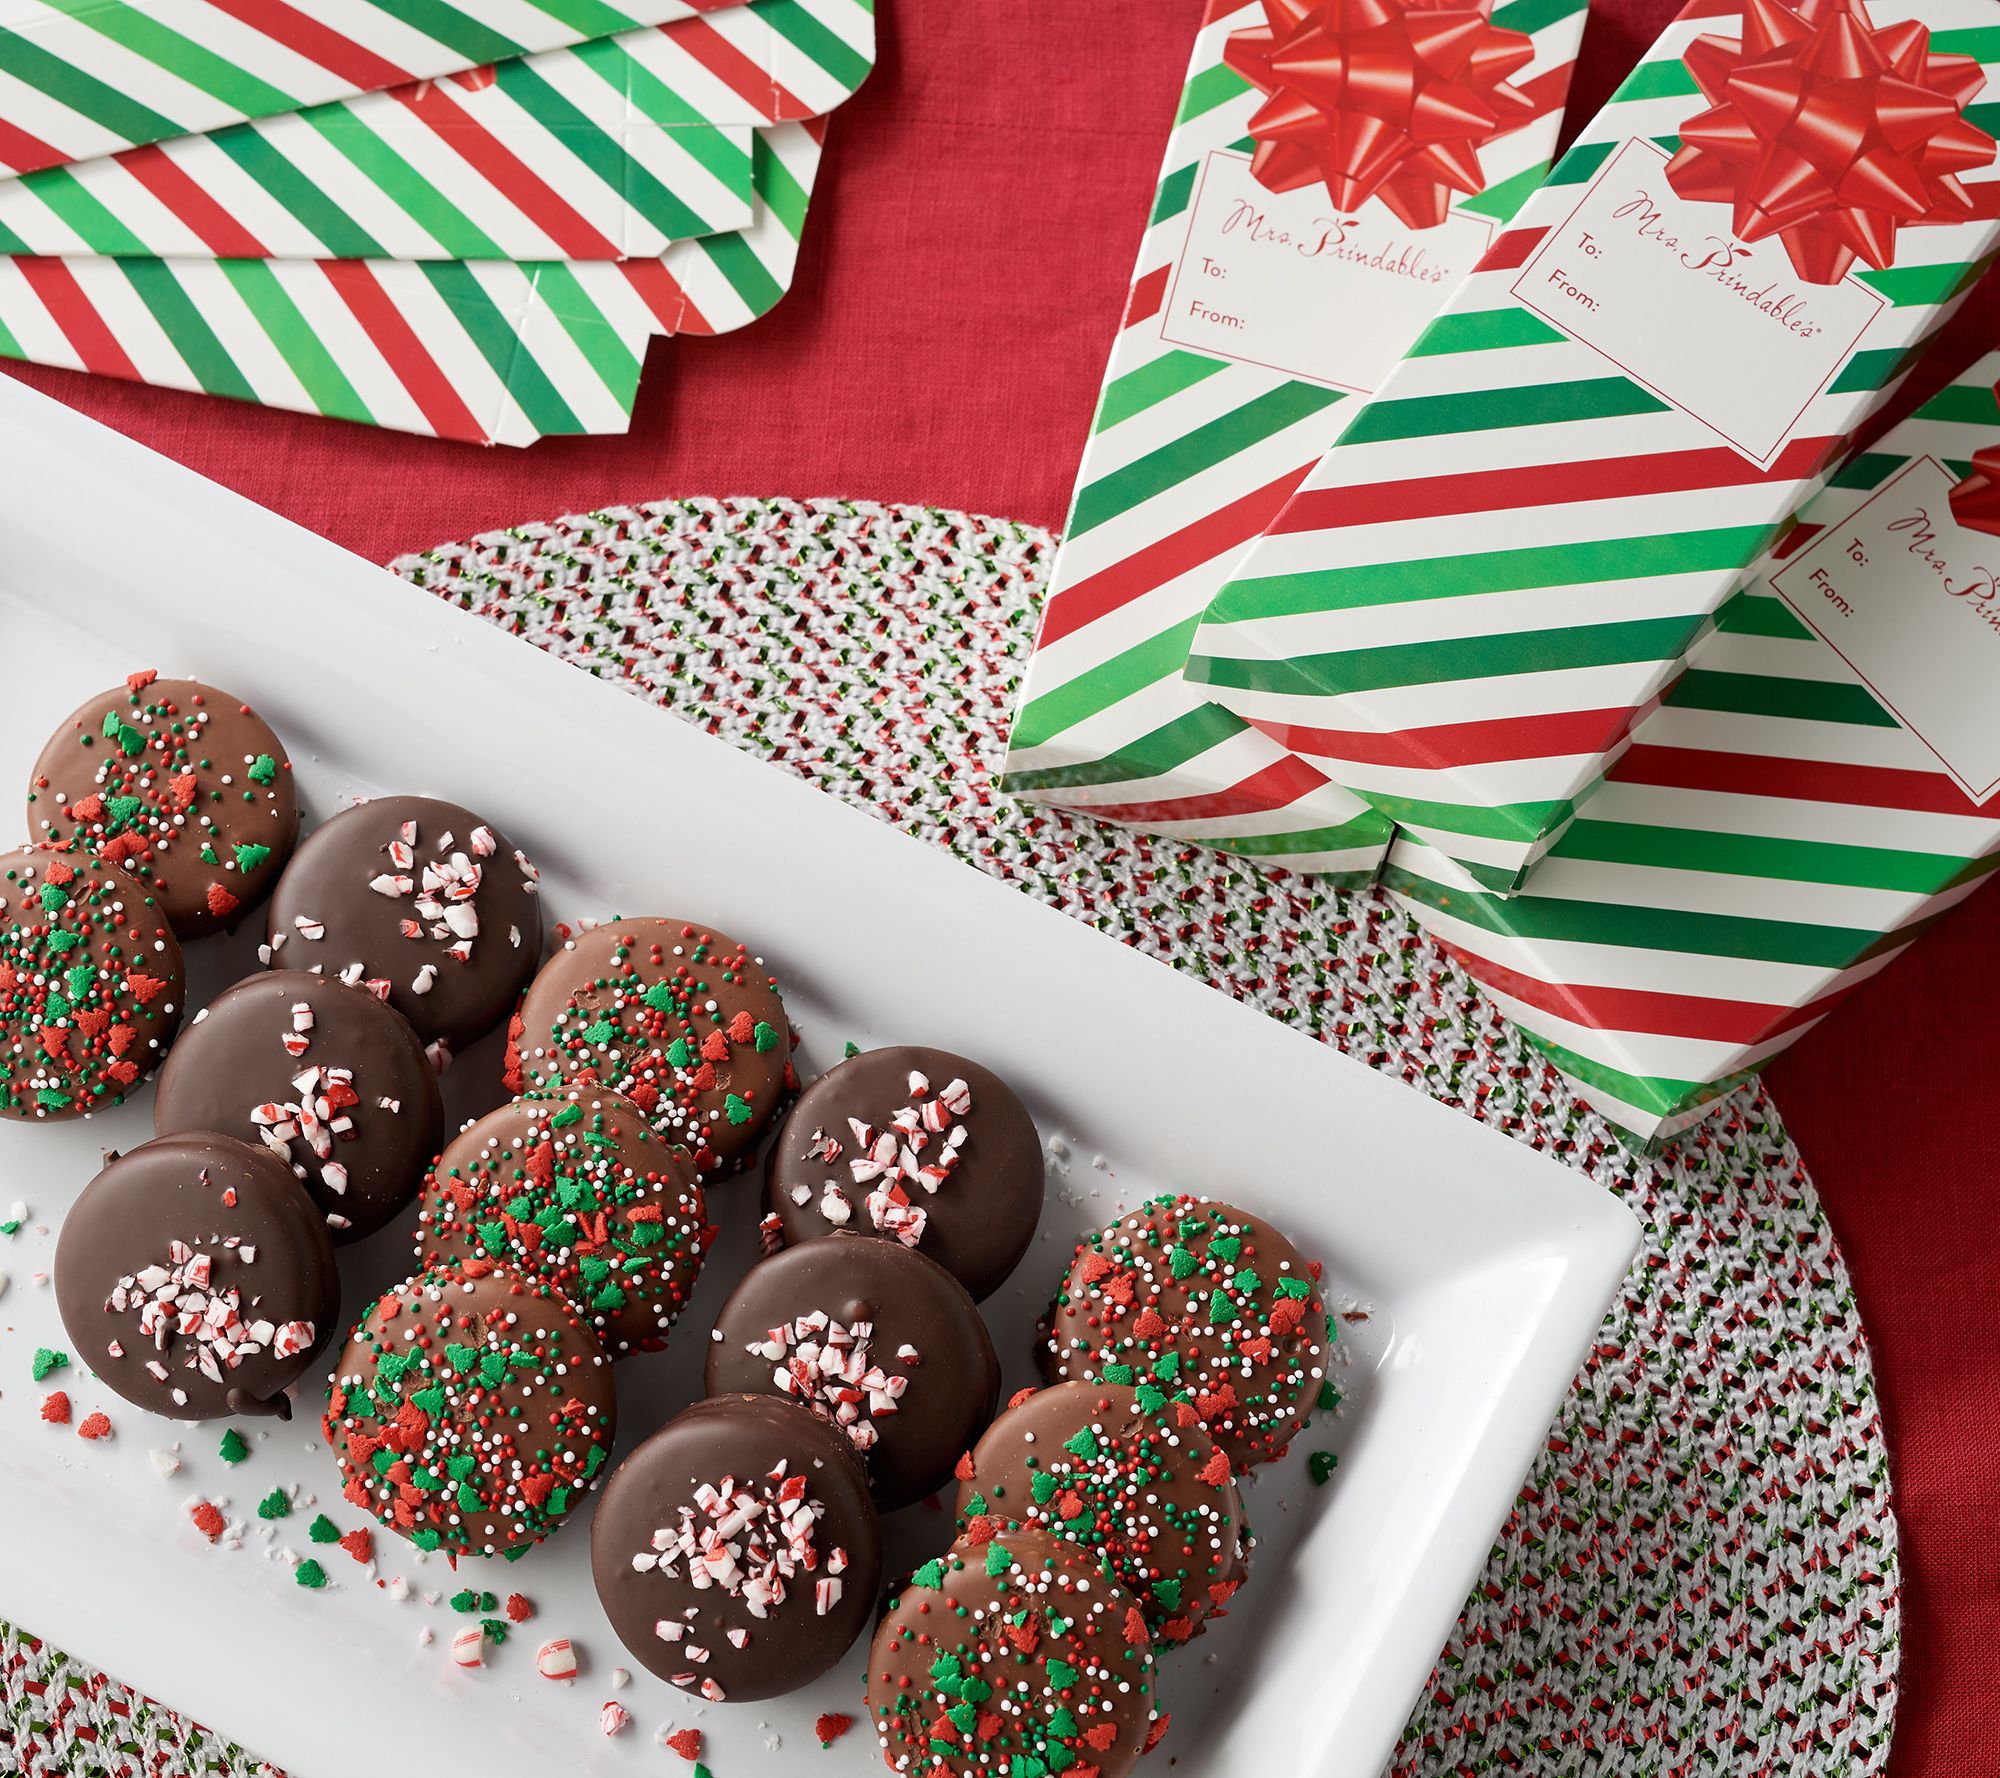 Mrs.Prindable's 24pc Holiday Chocolate Sandwich Cookies - QVC.com